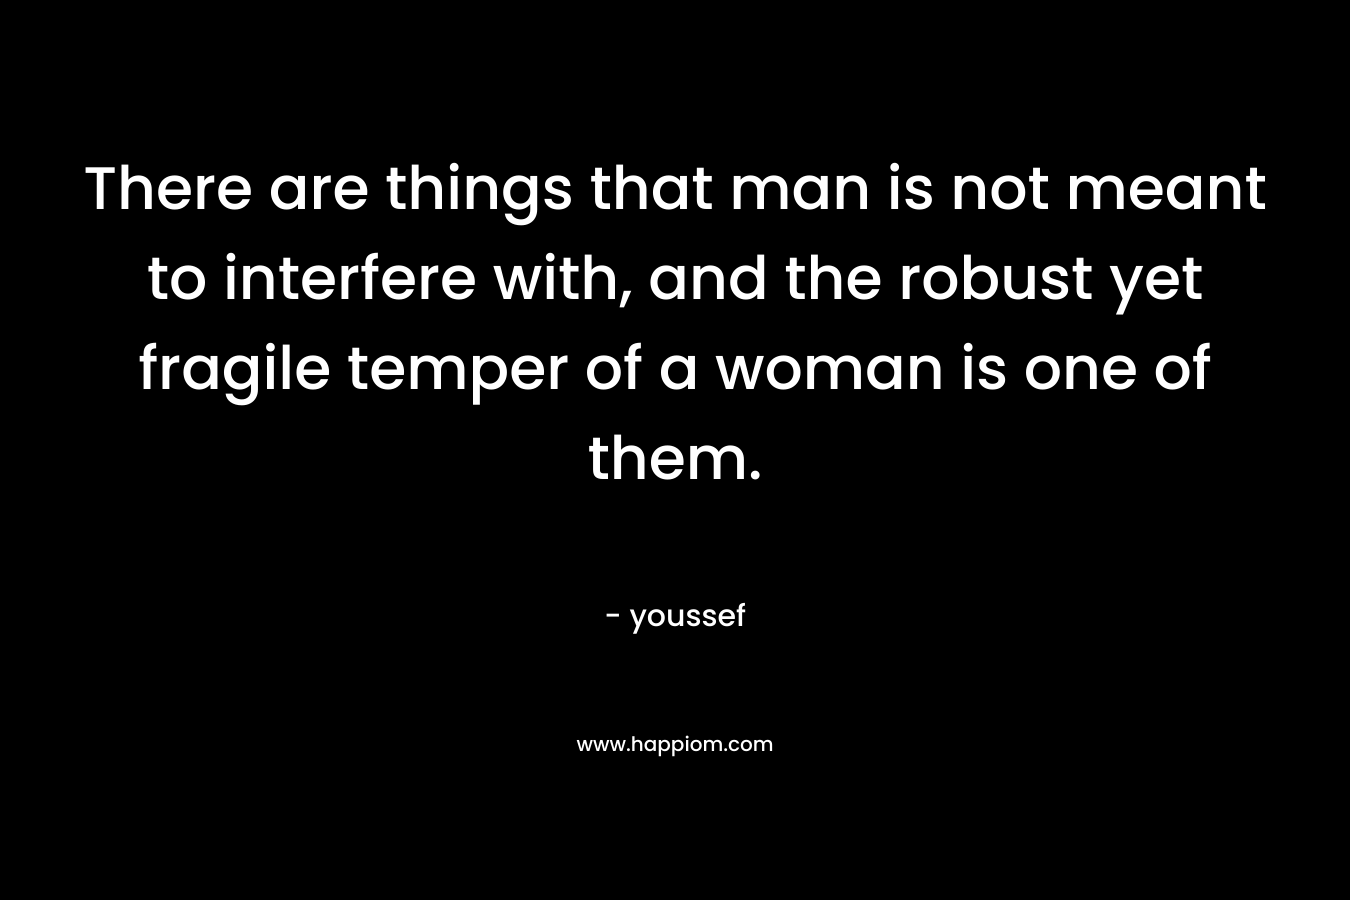 There are things that man is not meant to interfere with, and the robust yet fragile temper of a woman is one of them.